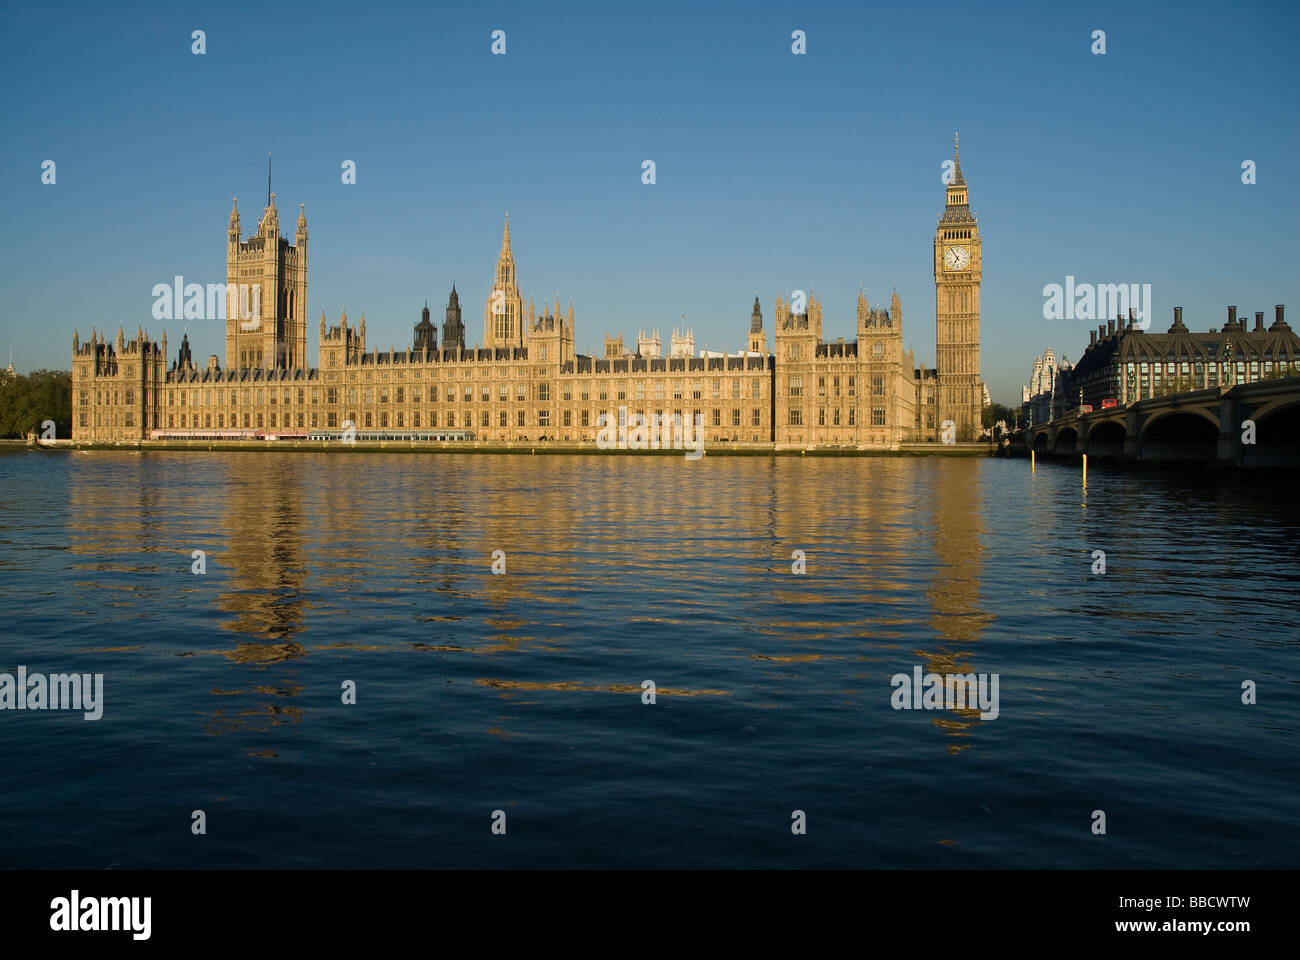 A view of the British Houses of Parliament as seen from the south bank of the River Thames London England Stock Photo